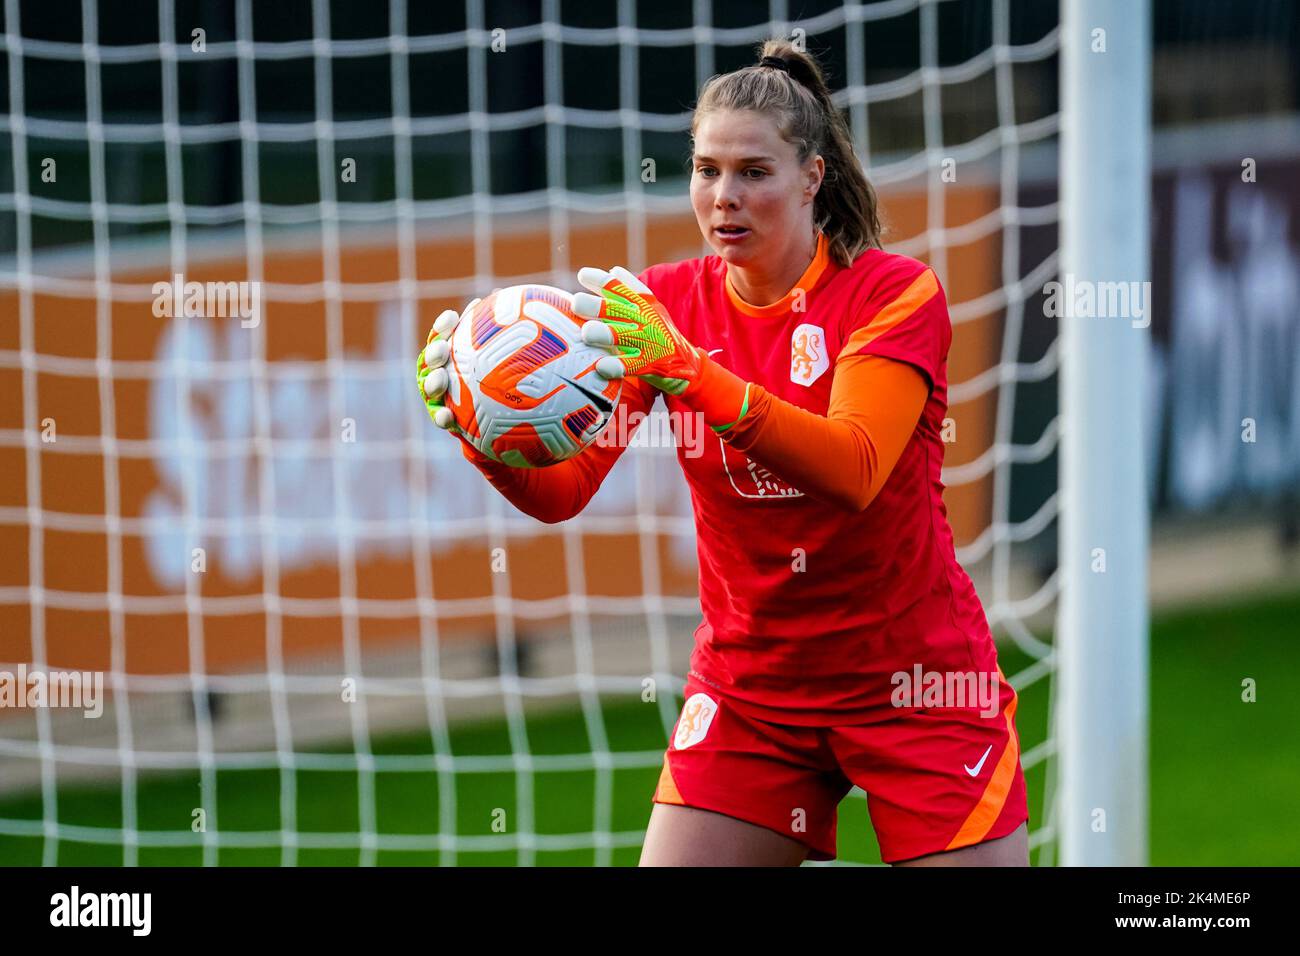 ZEIST, NETHERLANDS - OCTOBER 3: Lize Kop of the Netherlands during a Training Session of the Netherlands Women’s Football Team at the KNVB Campus on October 3, 2022 in Zeist, Netherlands (Photo by Joris Verwijst/Orange Pictures) Stock Photo